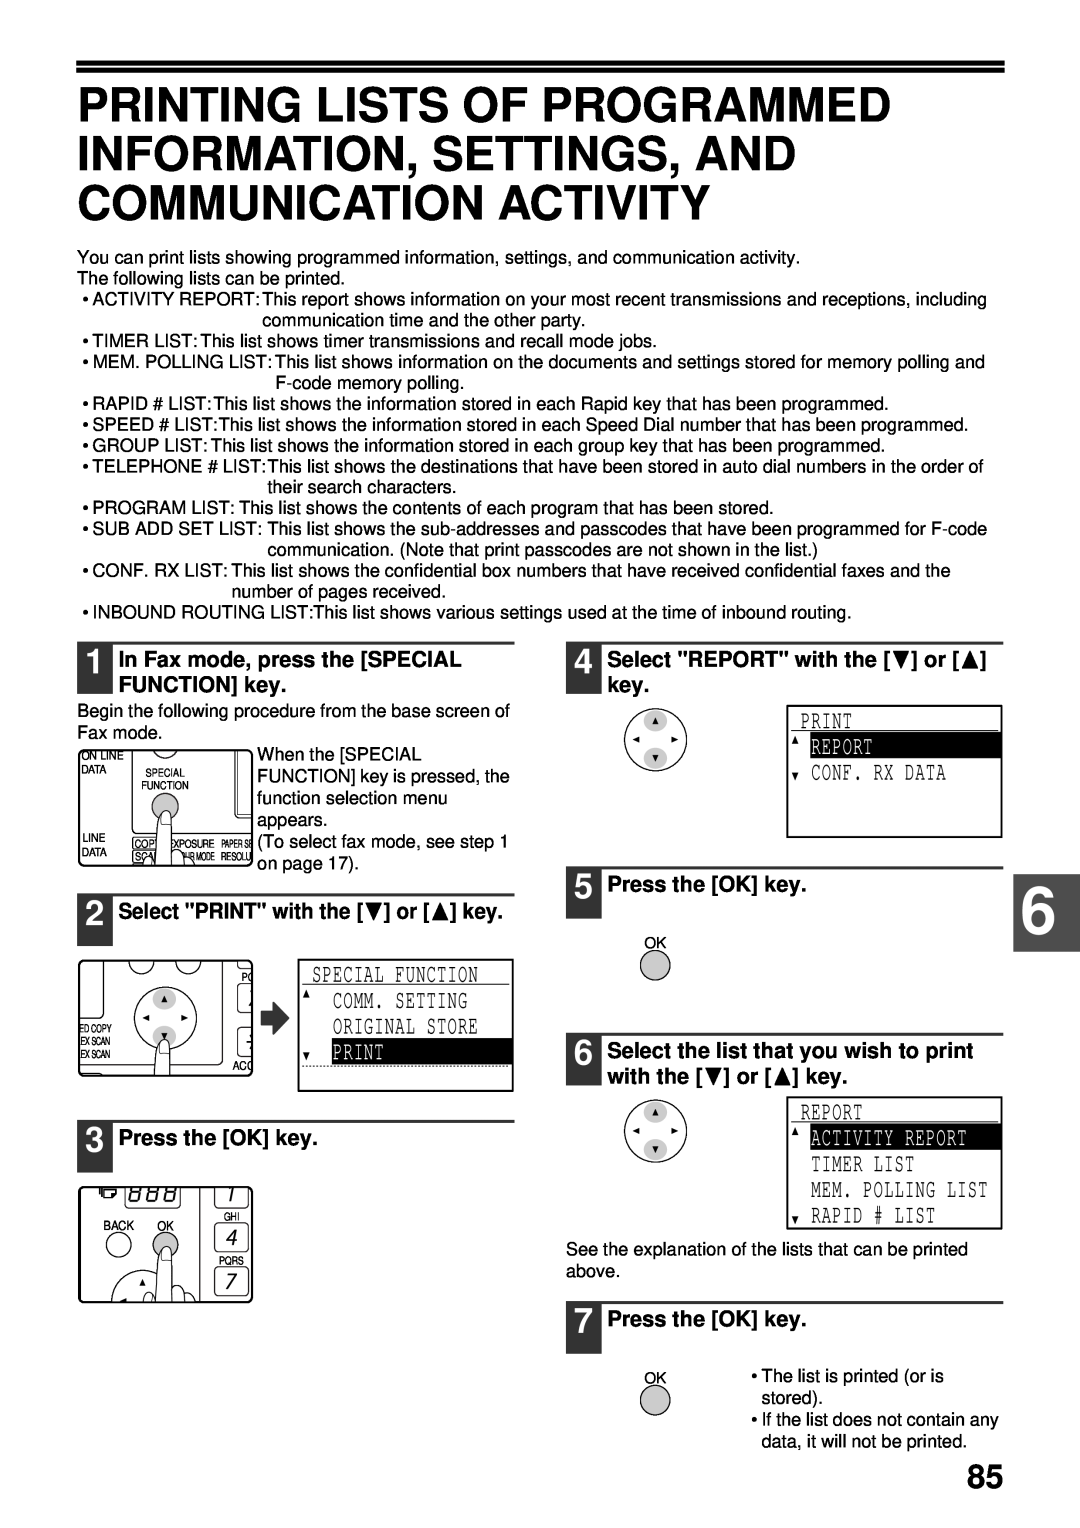 Sharp MX-FX13 Activity Report, In Fax mode, press the SPECIAL FUNCTION key, Select REPORT with the or key, Function 